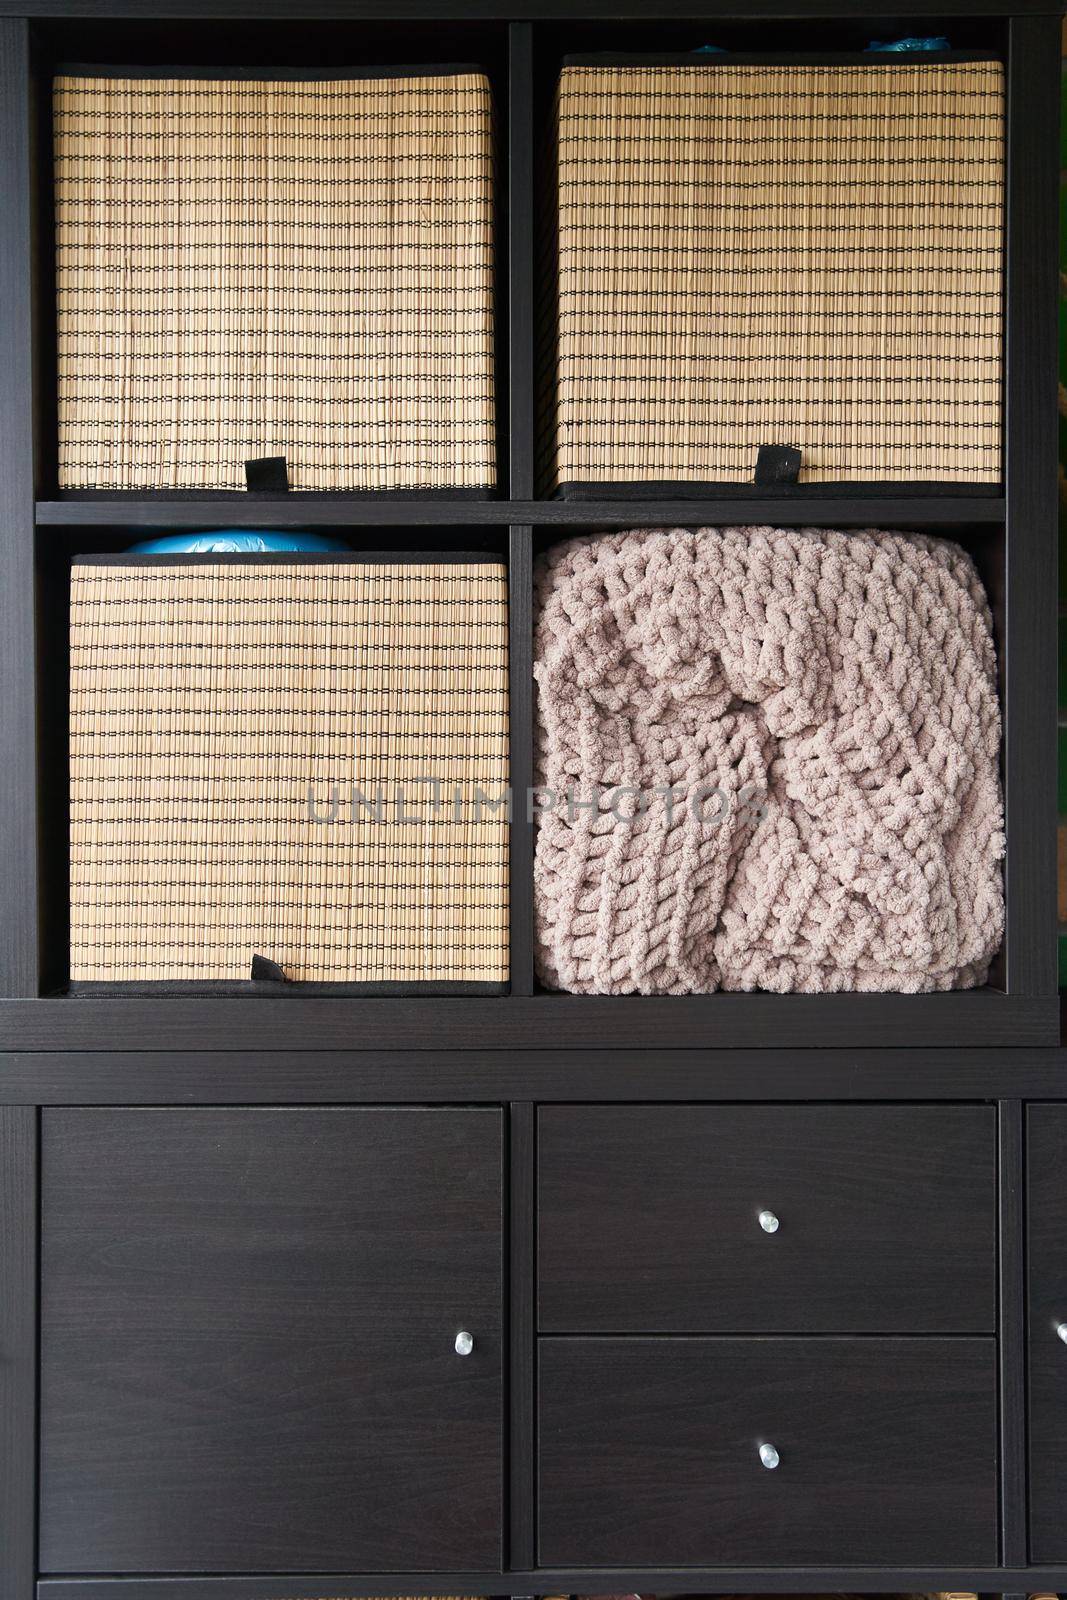 Wicker boxes for things on the shelves. Wardrobe for storage of things. High quality photo